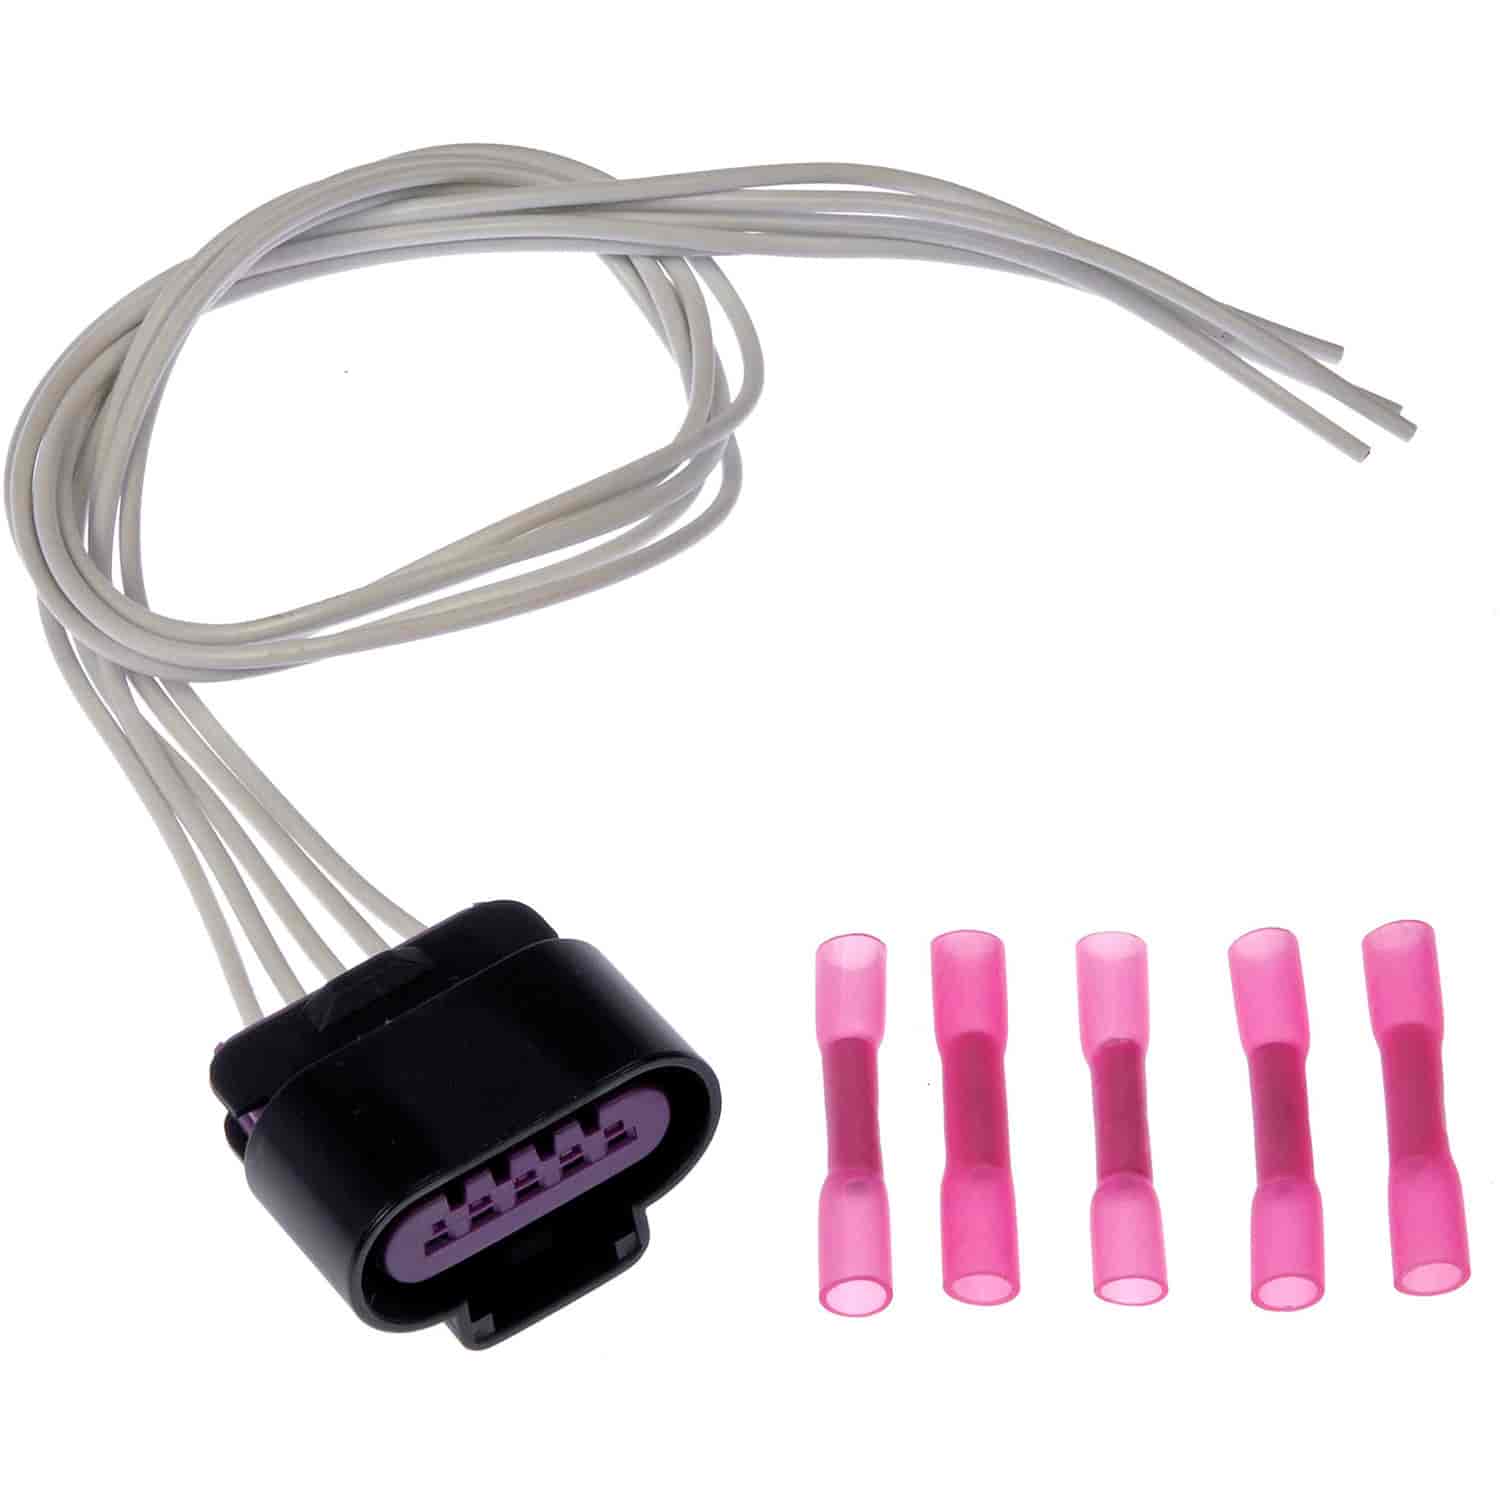 GM Multi-Purpose Socket With Pigtails